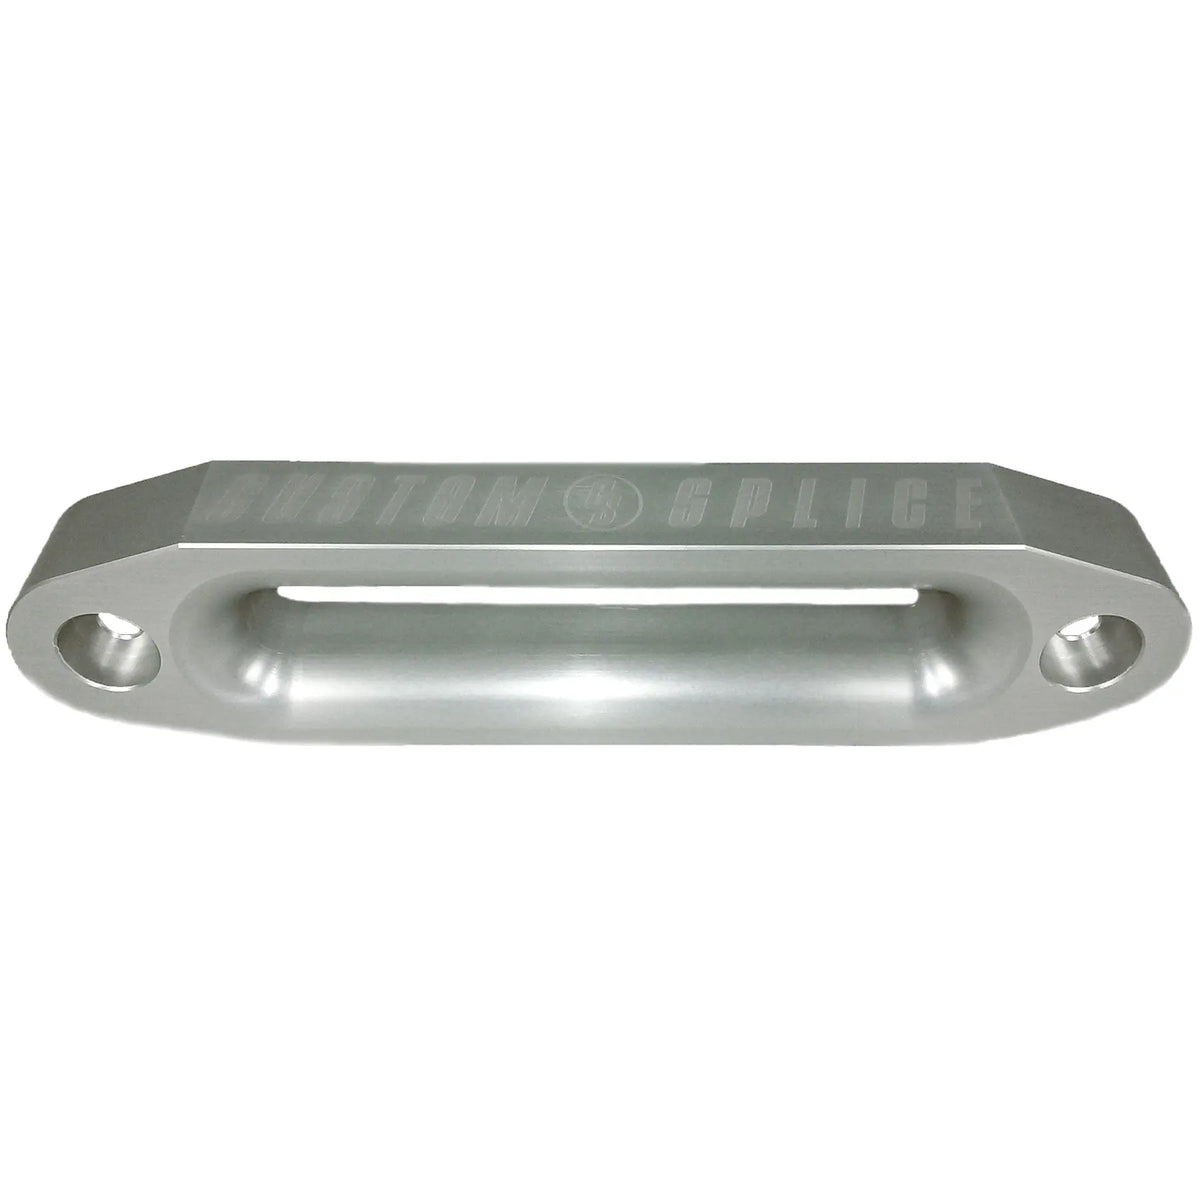 Silver 10" Double Thick Hawse Fairlead with Large Inside Radii for Synthetic Winch Rope.